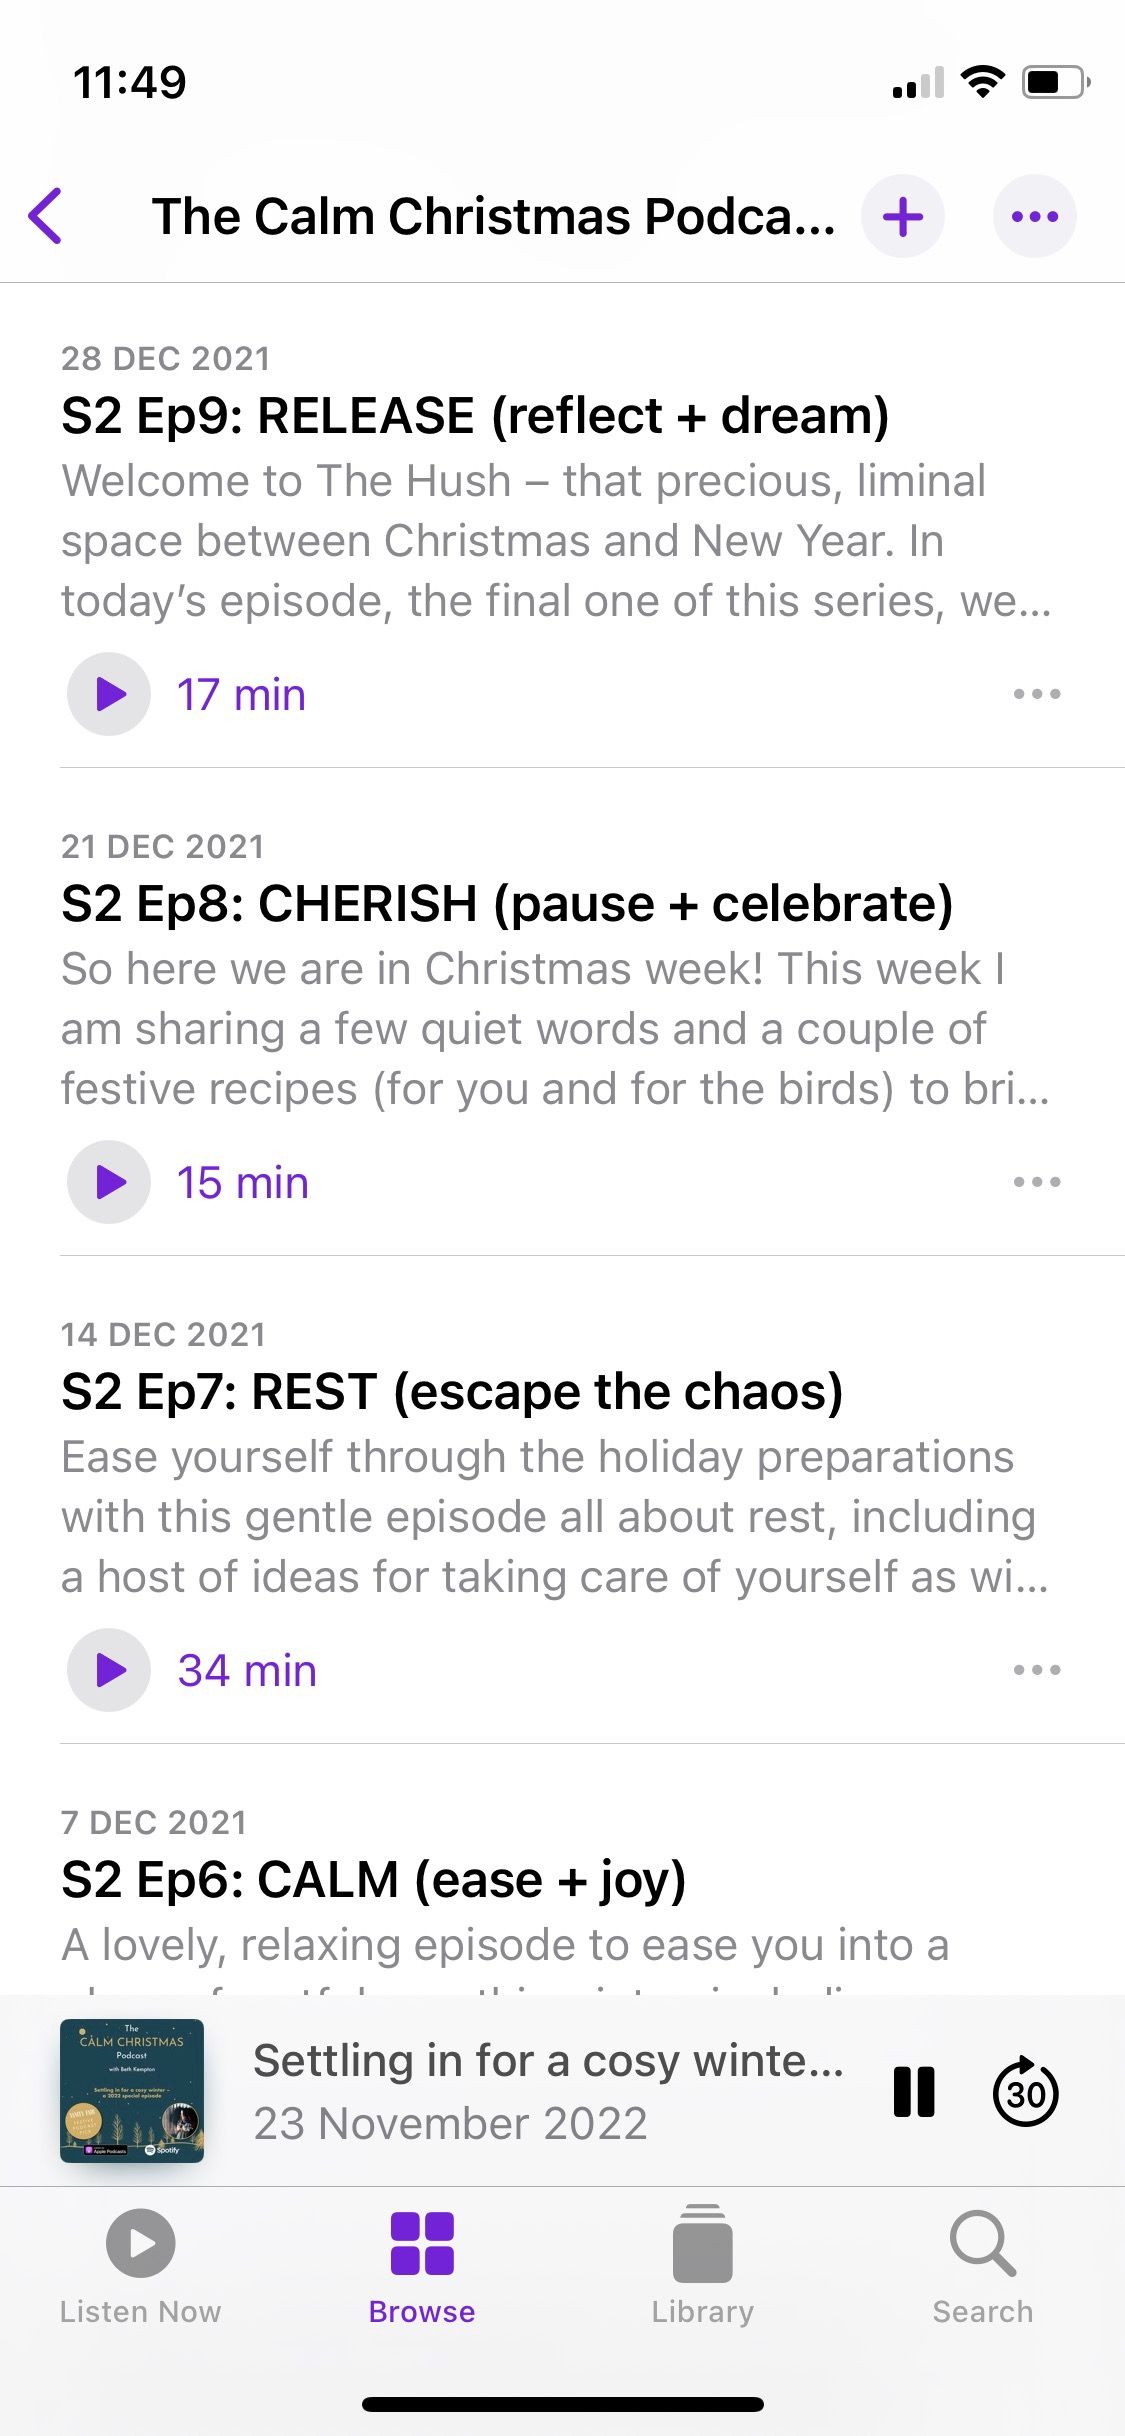 Screenshot from The Calm Christmas Podcast showing the episode list